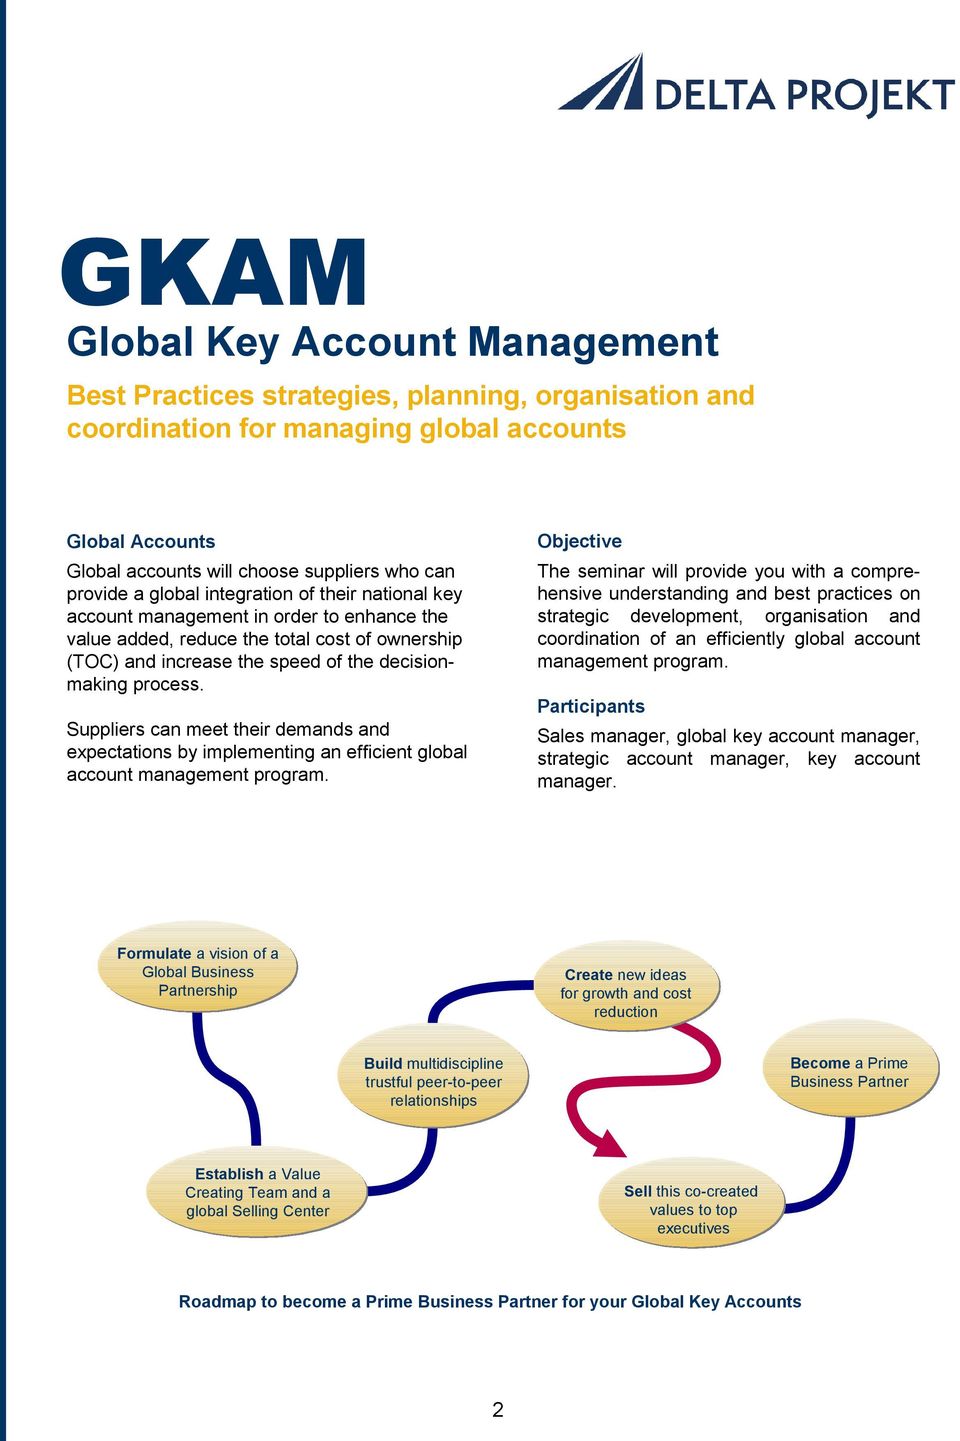 Suppliers can meet their demands and expectations by implementing an efficient global account management program.